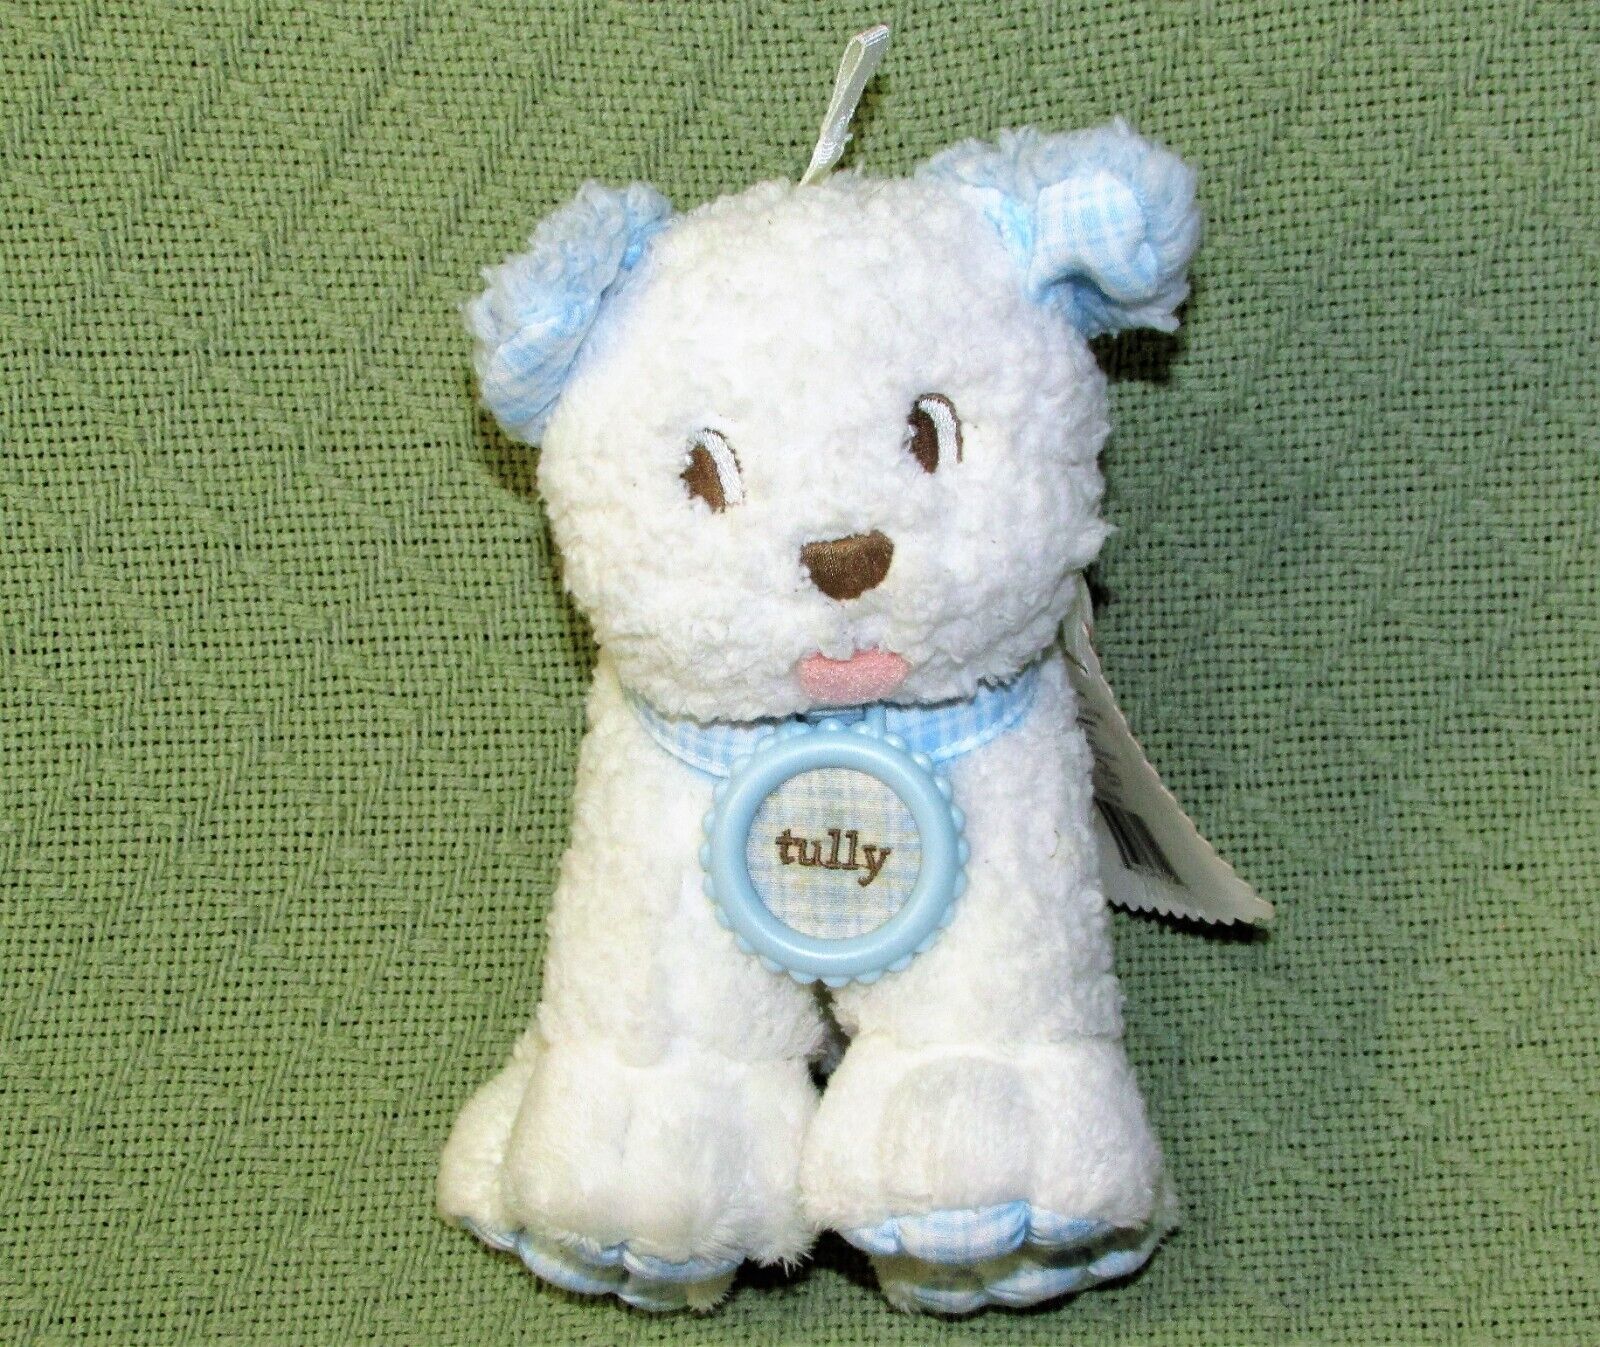 AMY COE BABY PLUSH NEWBORN RATTLE TULLY TOY WHITE BLUE PLAID LIMITED EDITION  - $10.80